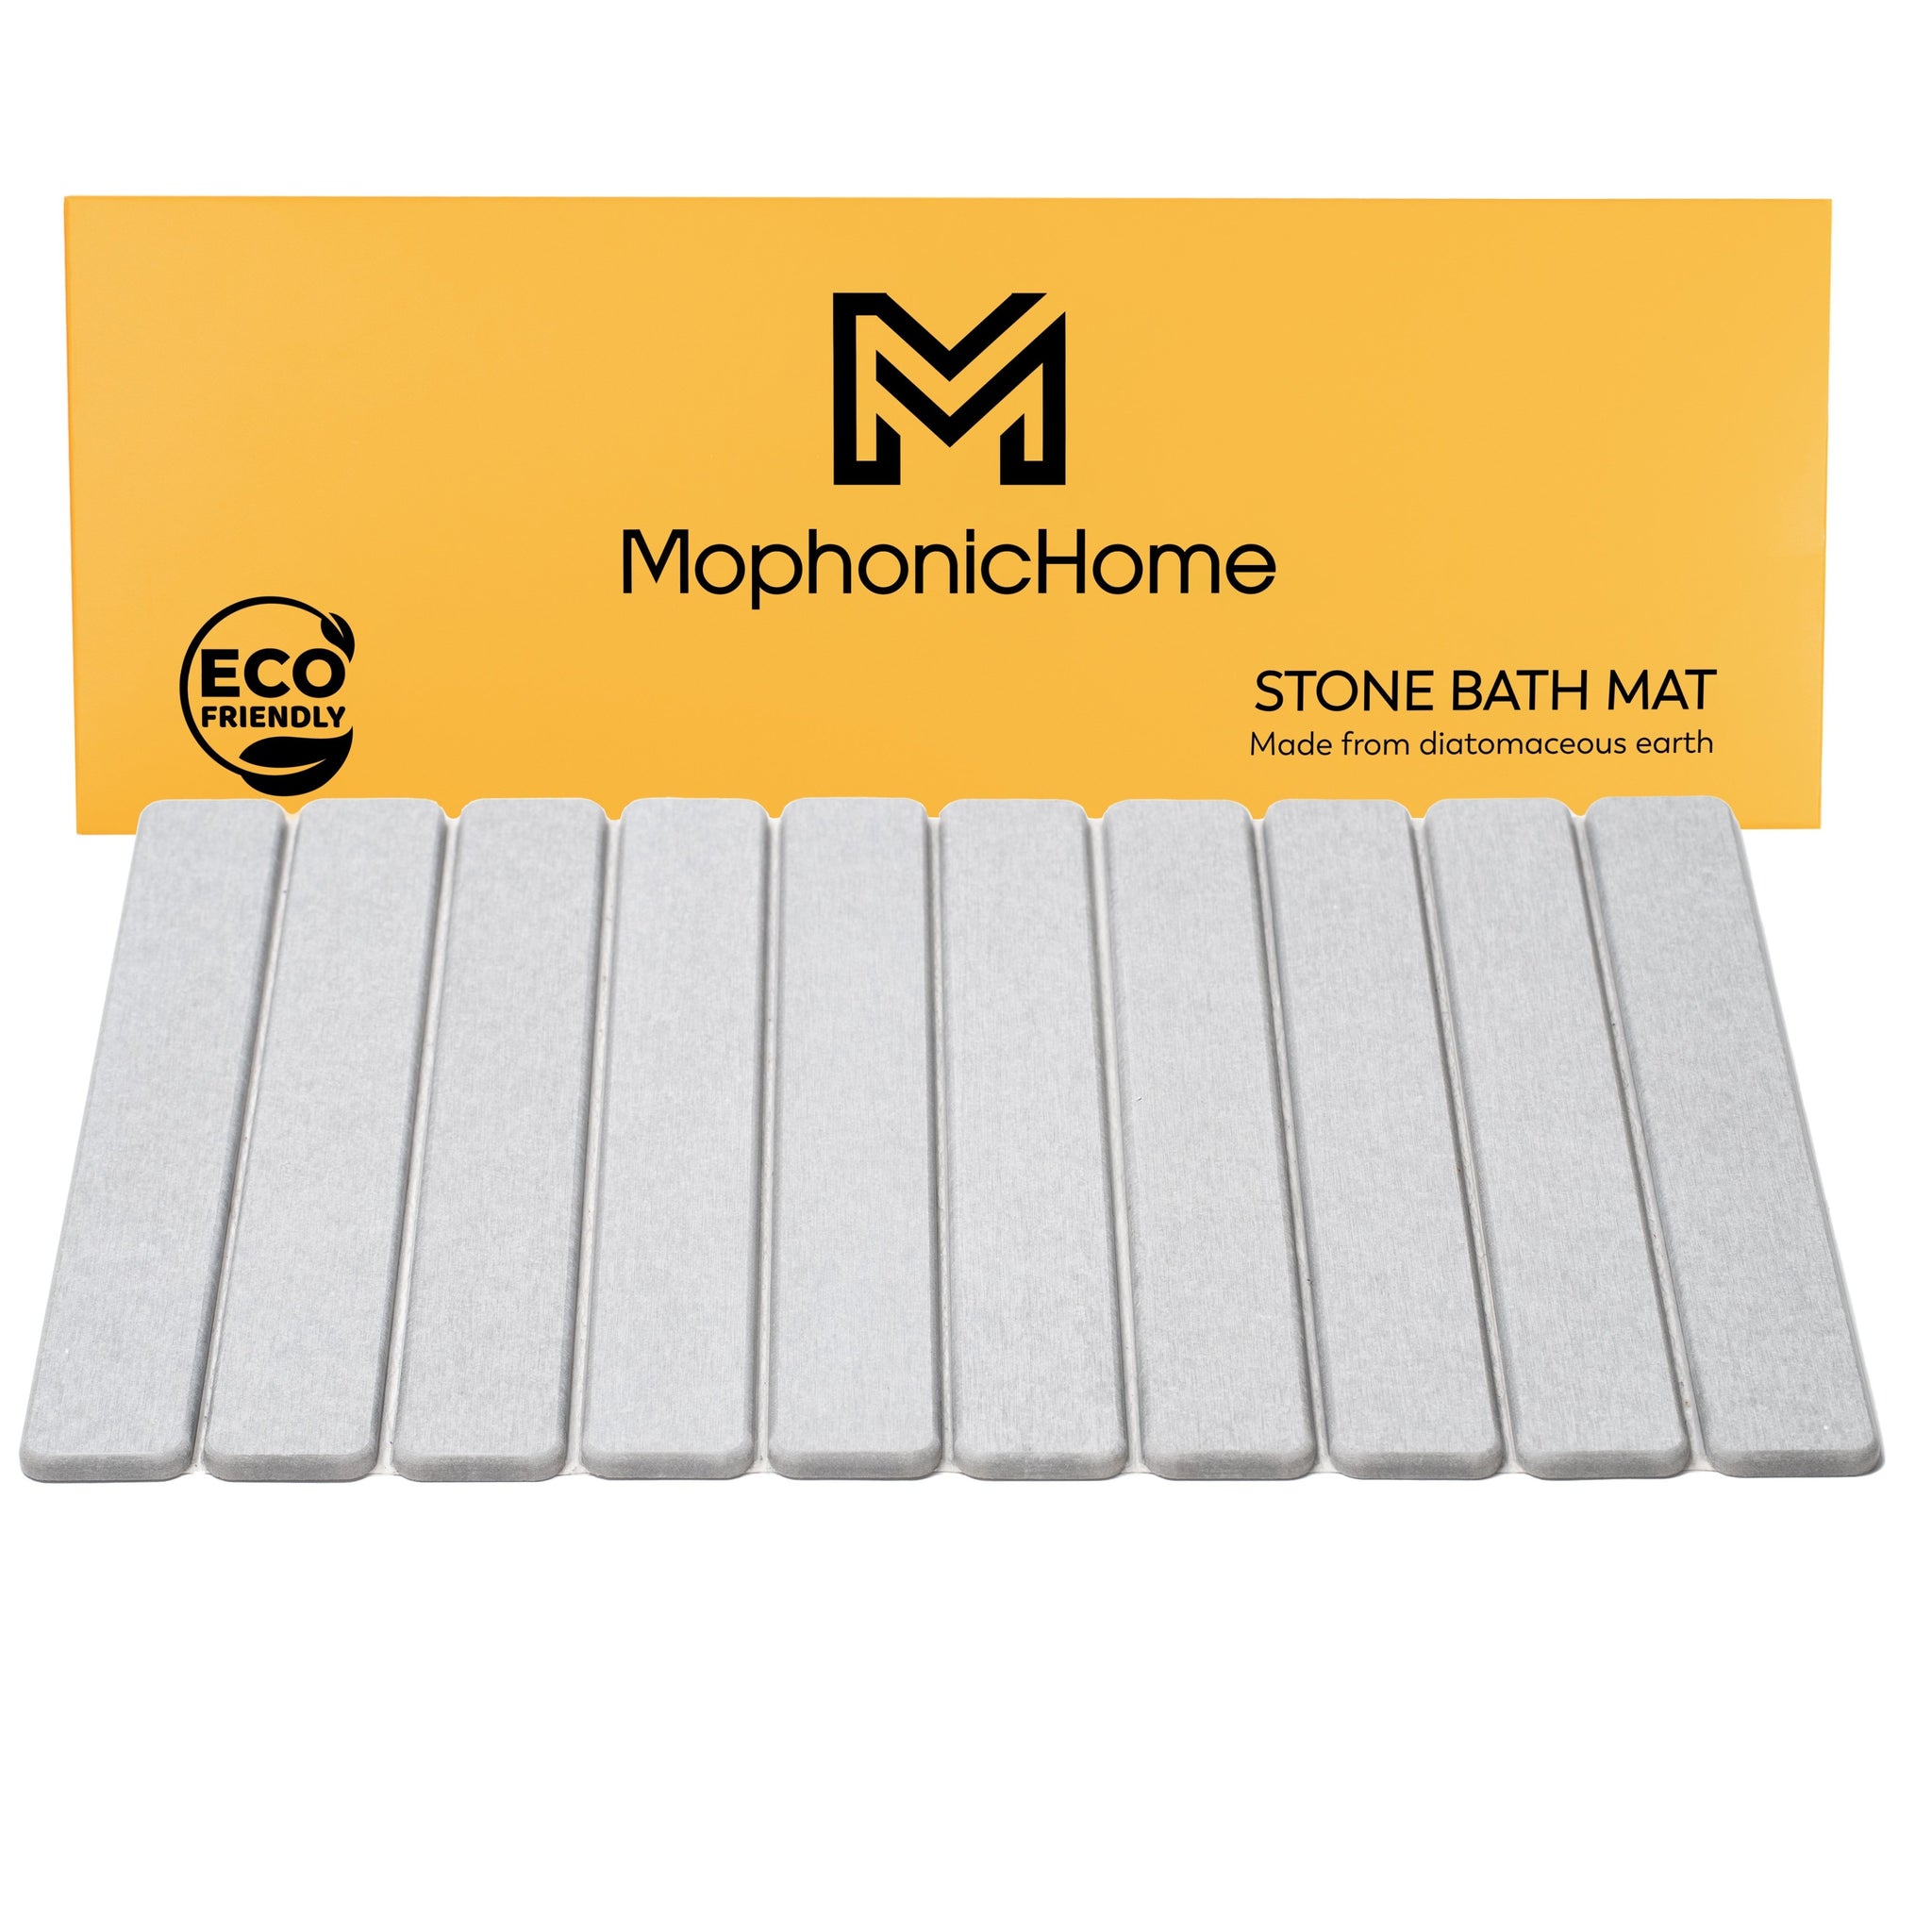 How to choose the best diatomite stone bath mat?